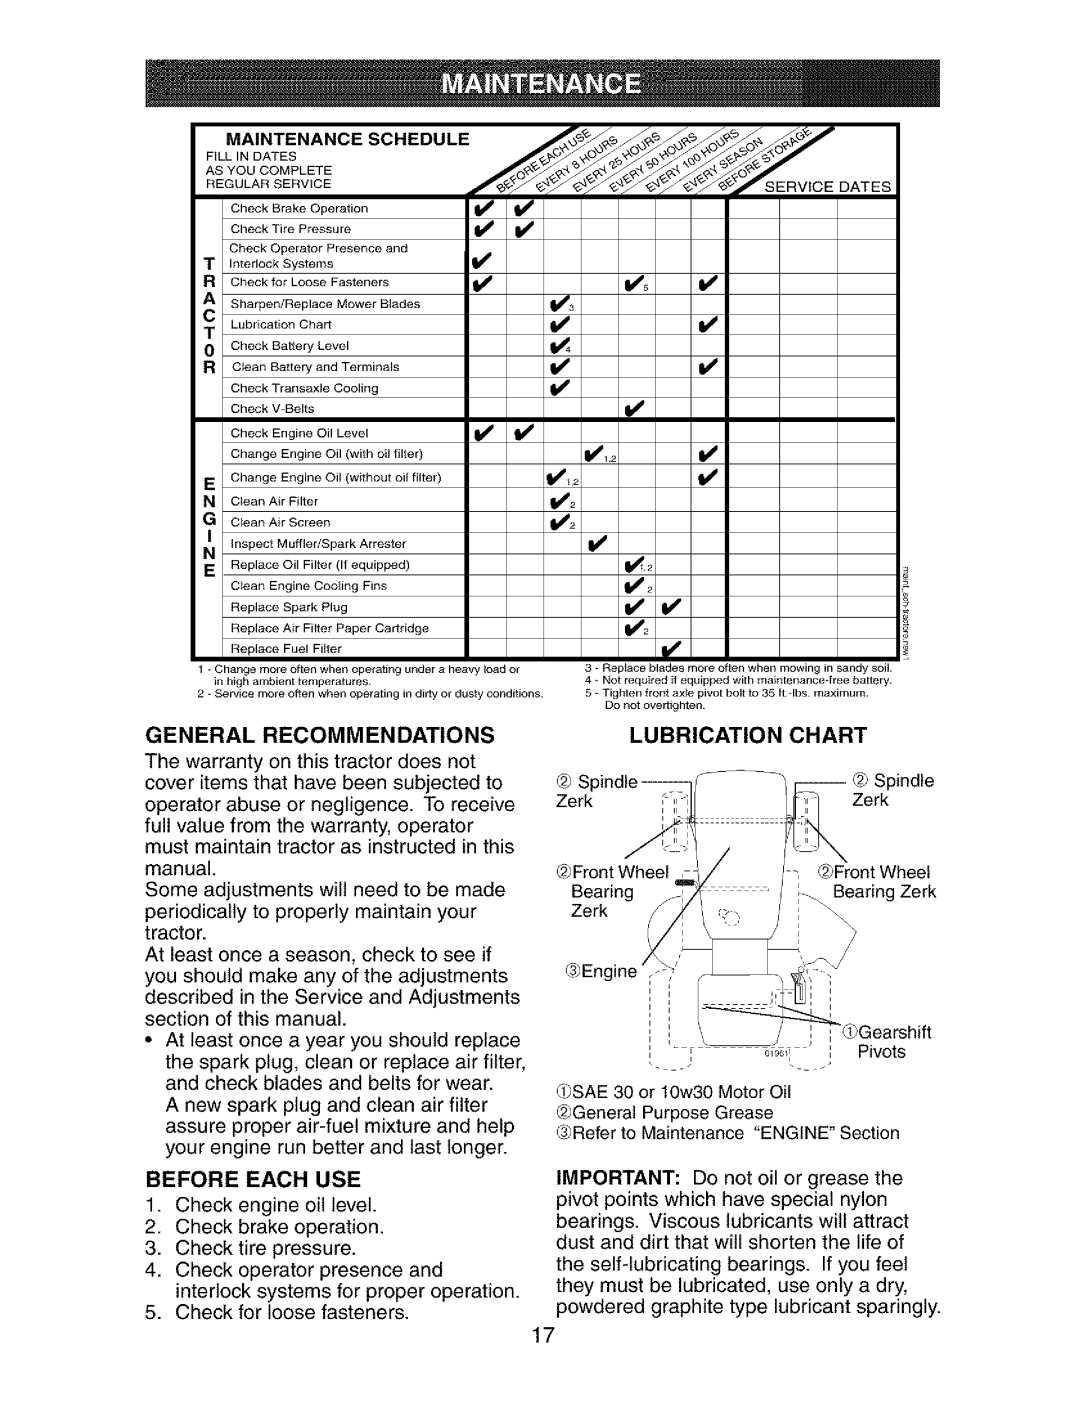 Craftsman 917.27339 owner manual General Recommendations, Before Each USE, Lubrication Chart 